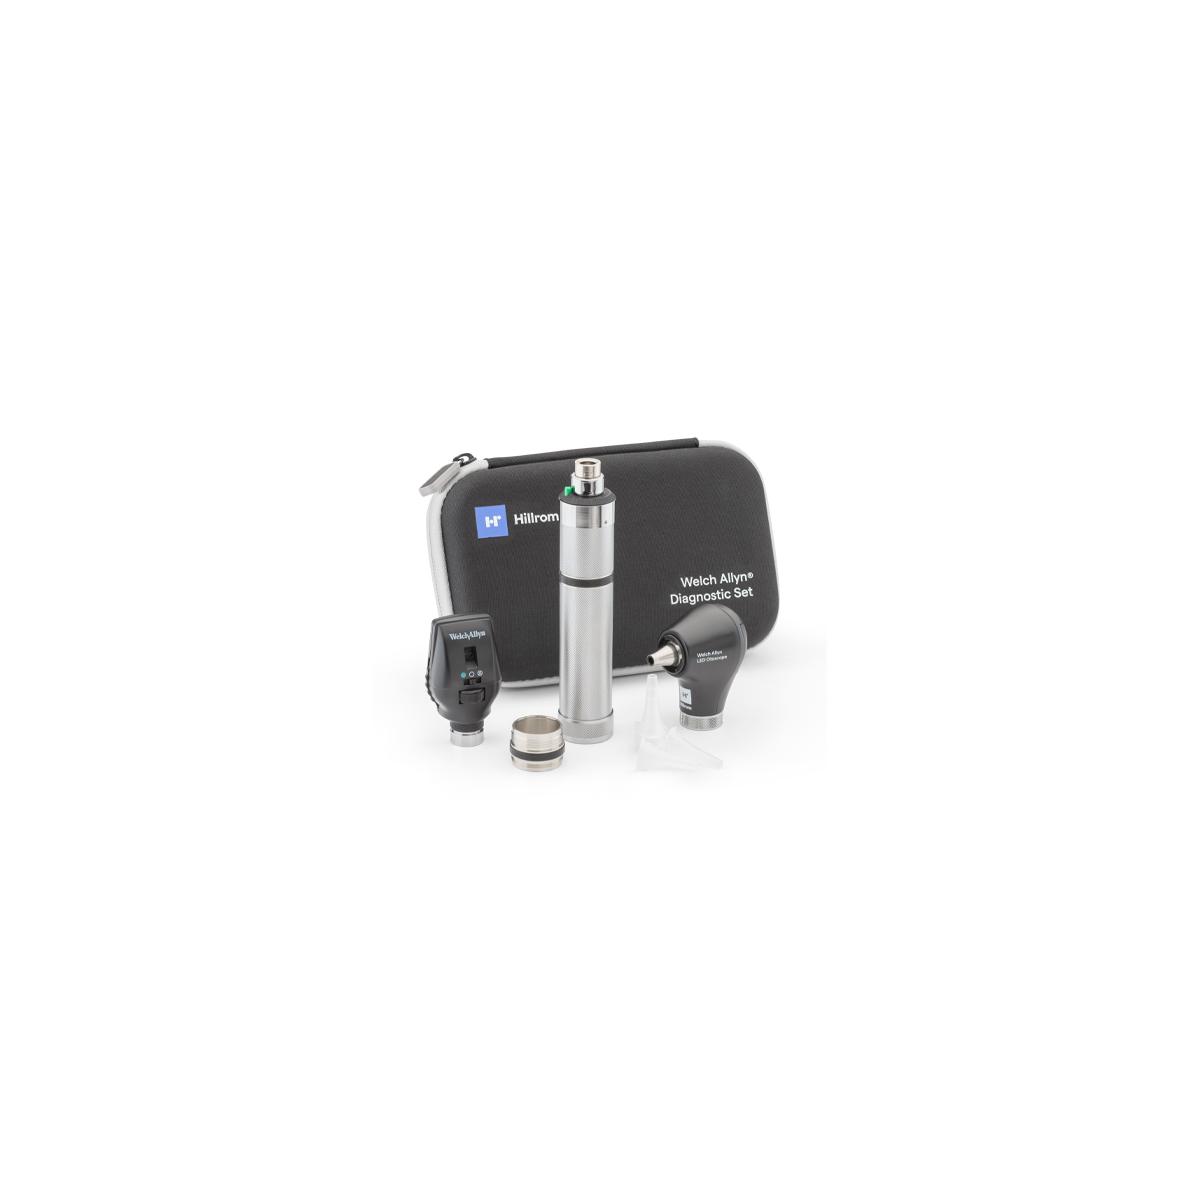  Welch Allyn Diagnostic Set case with scopes